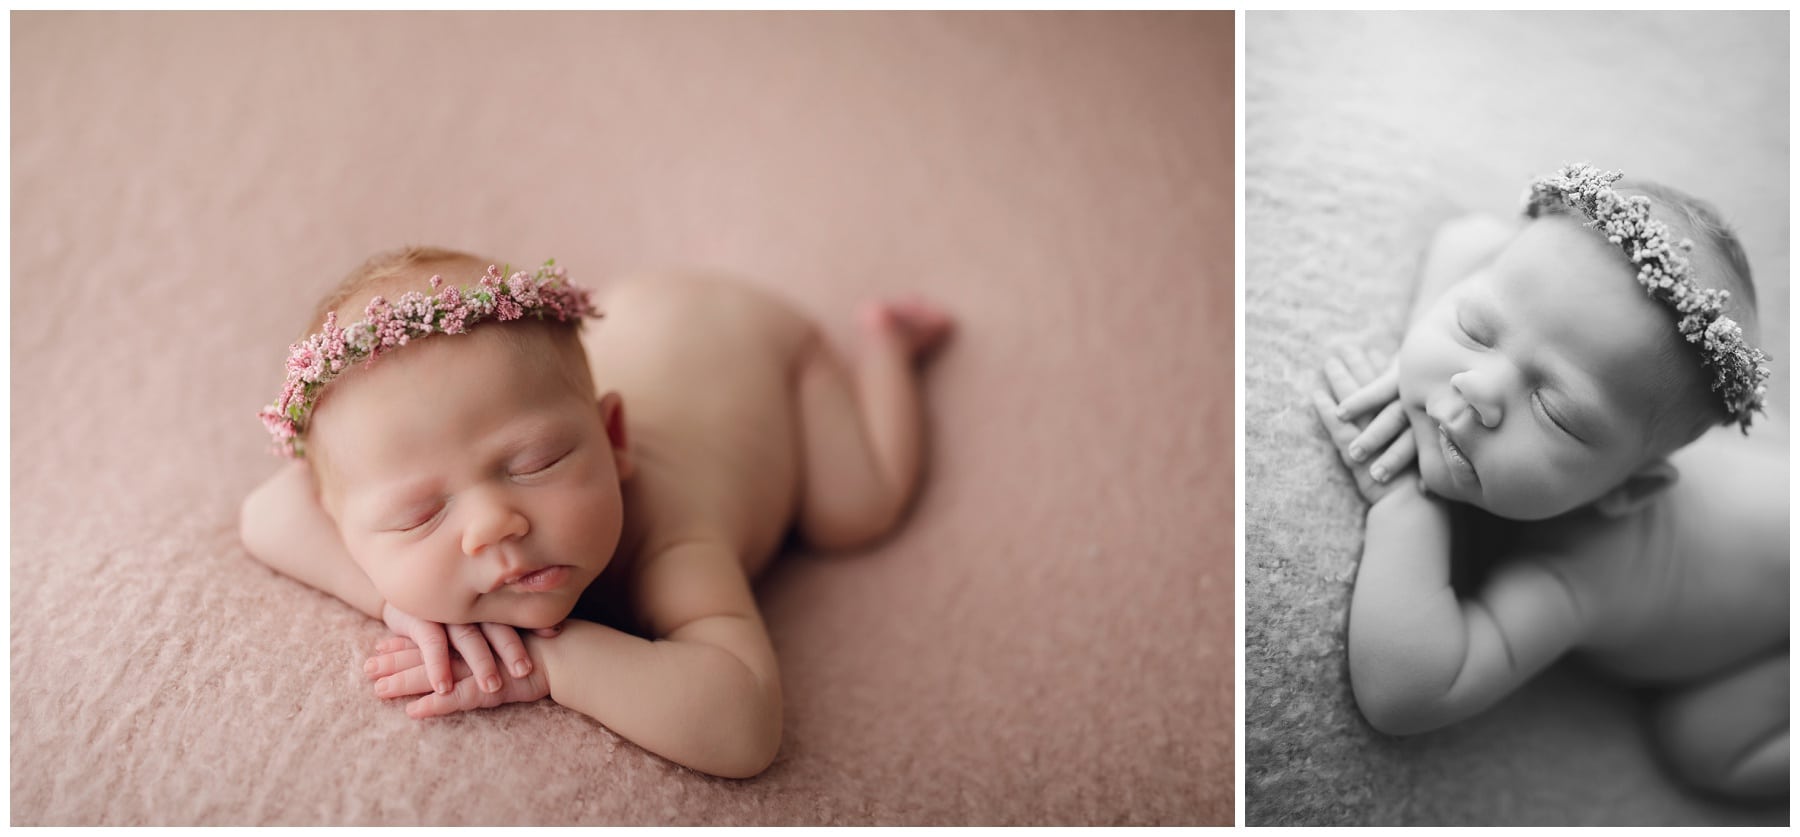 new baby photos sleeping baby girl on soft pink backdrop with floral halo